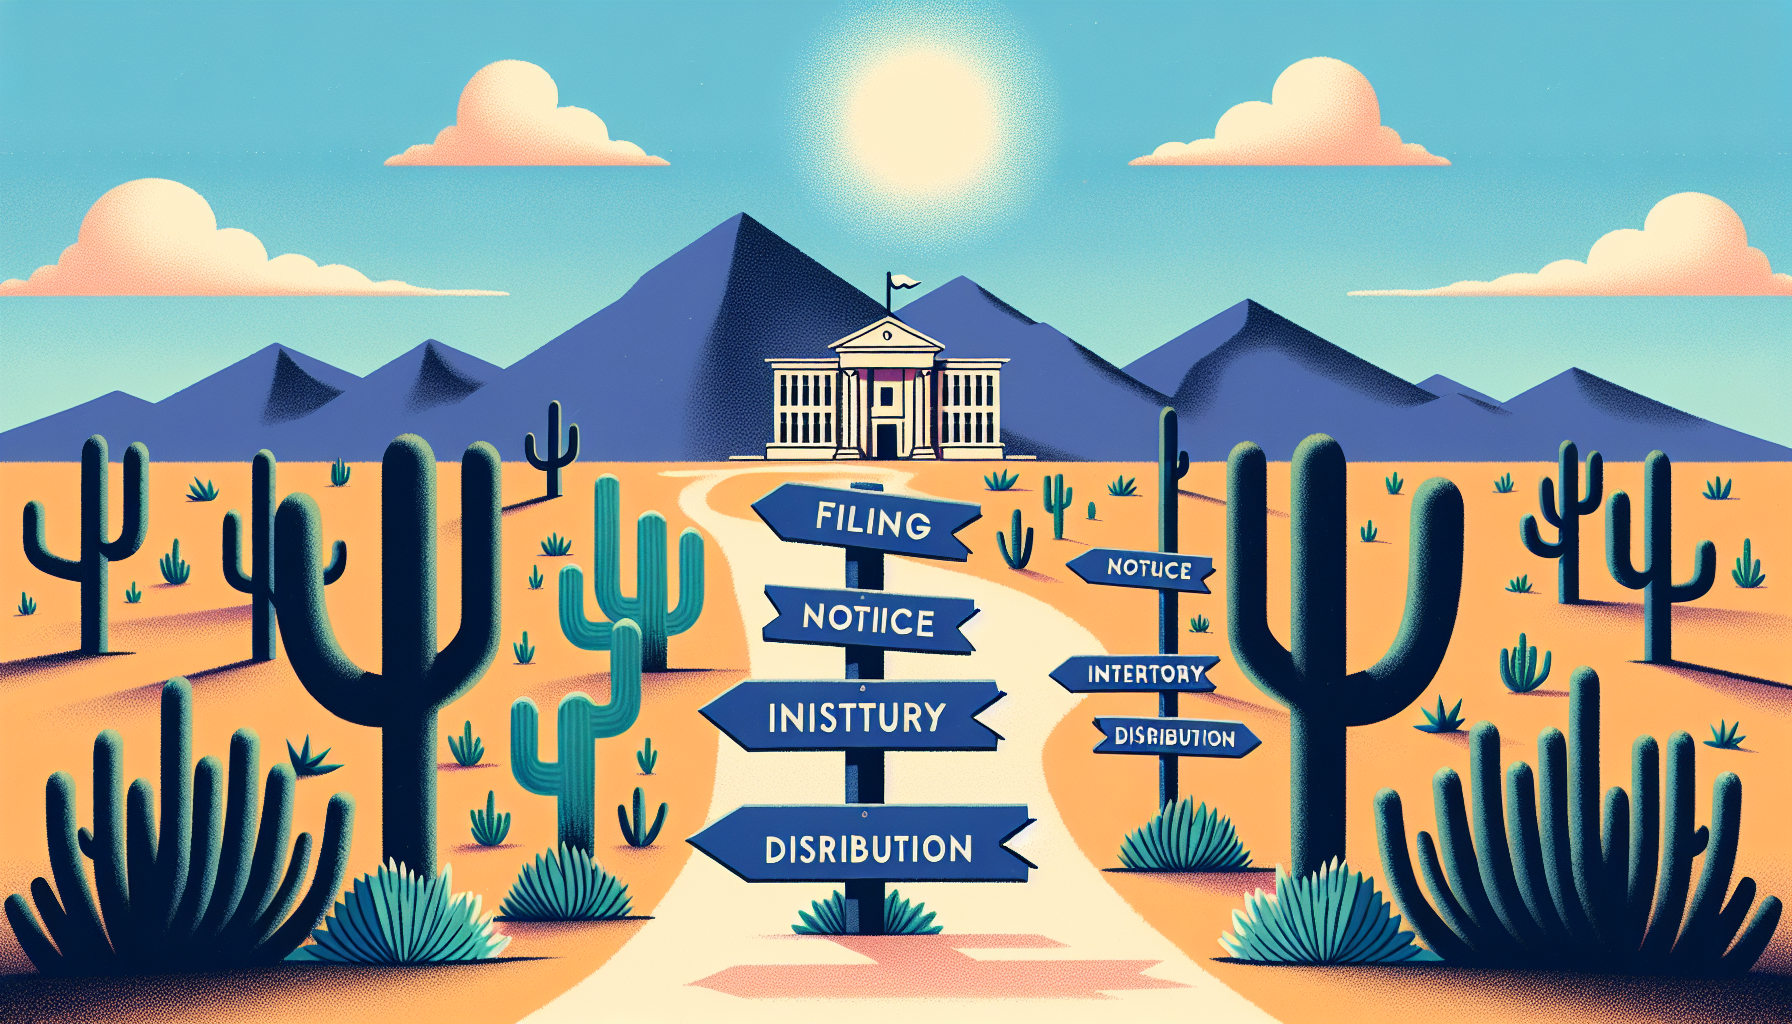 Illustration of the probate process in Arizona